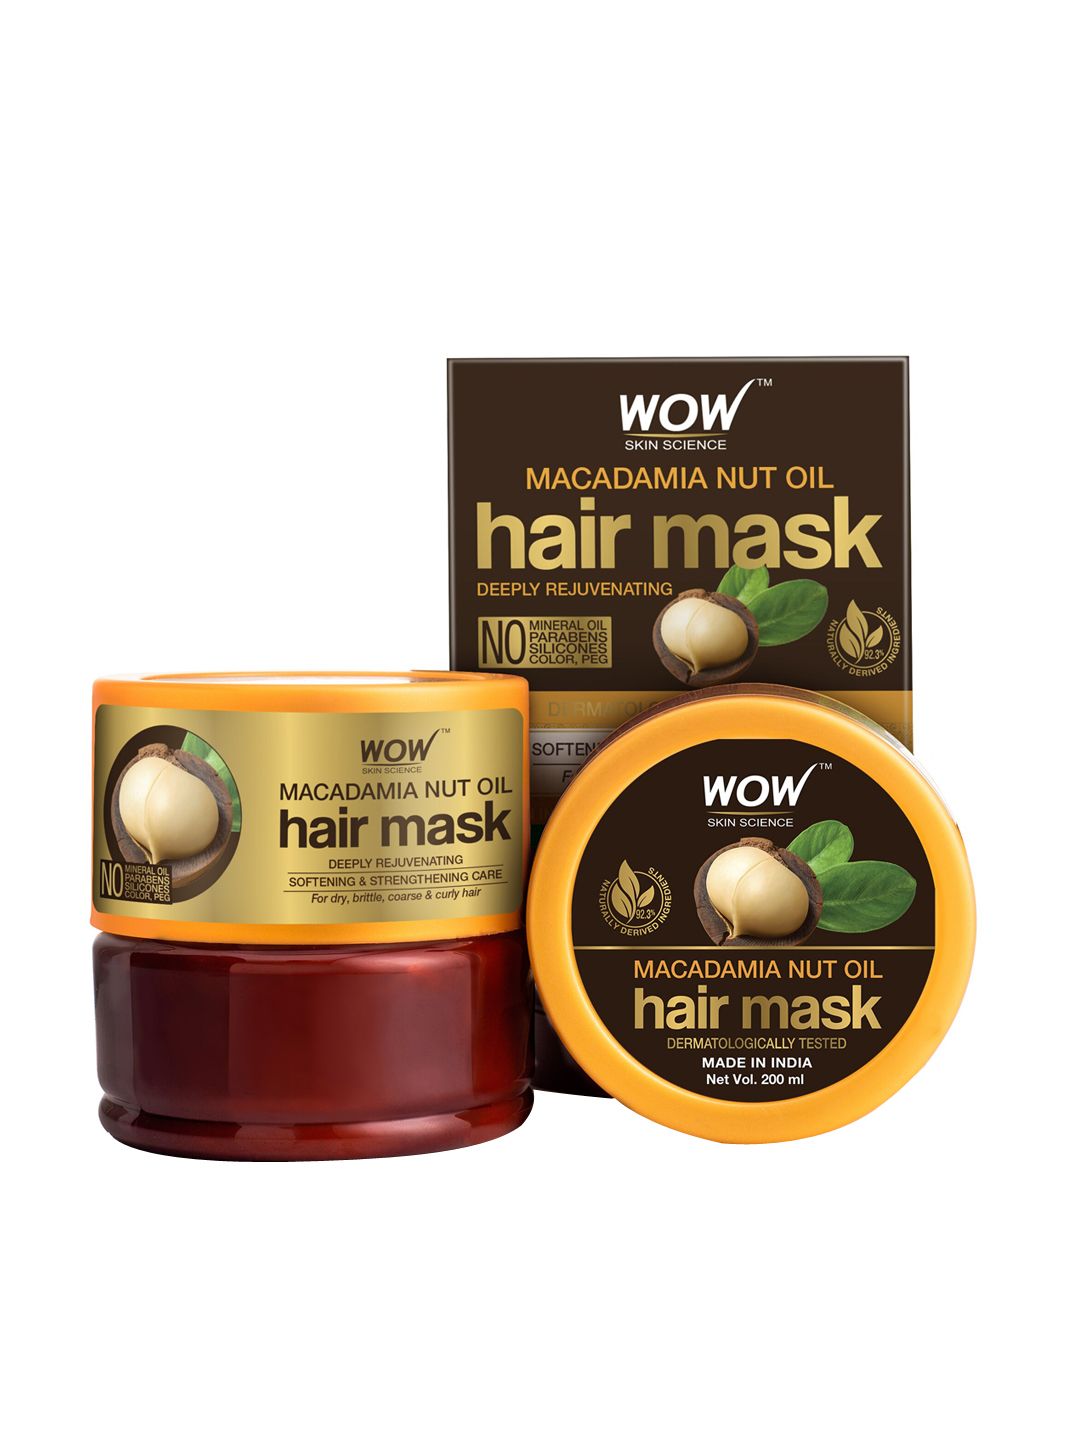 WOW SKIN SCIENCE Deeply Rejuvenating Macadamia Nut Oil Hair Mask - 200 ml Price in India